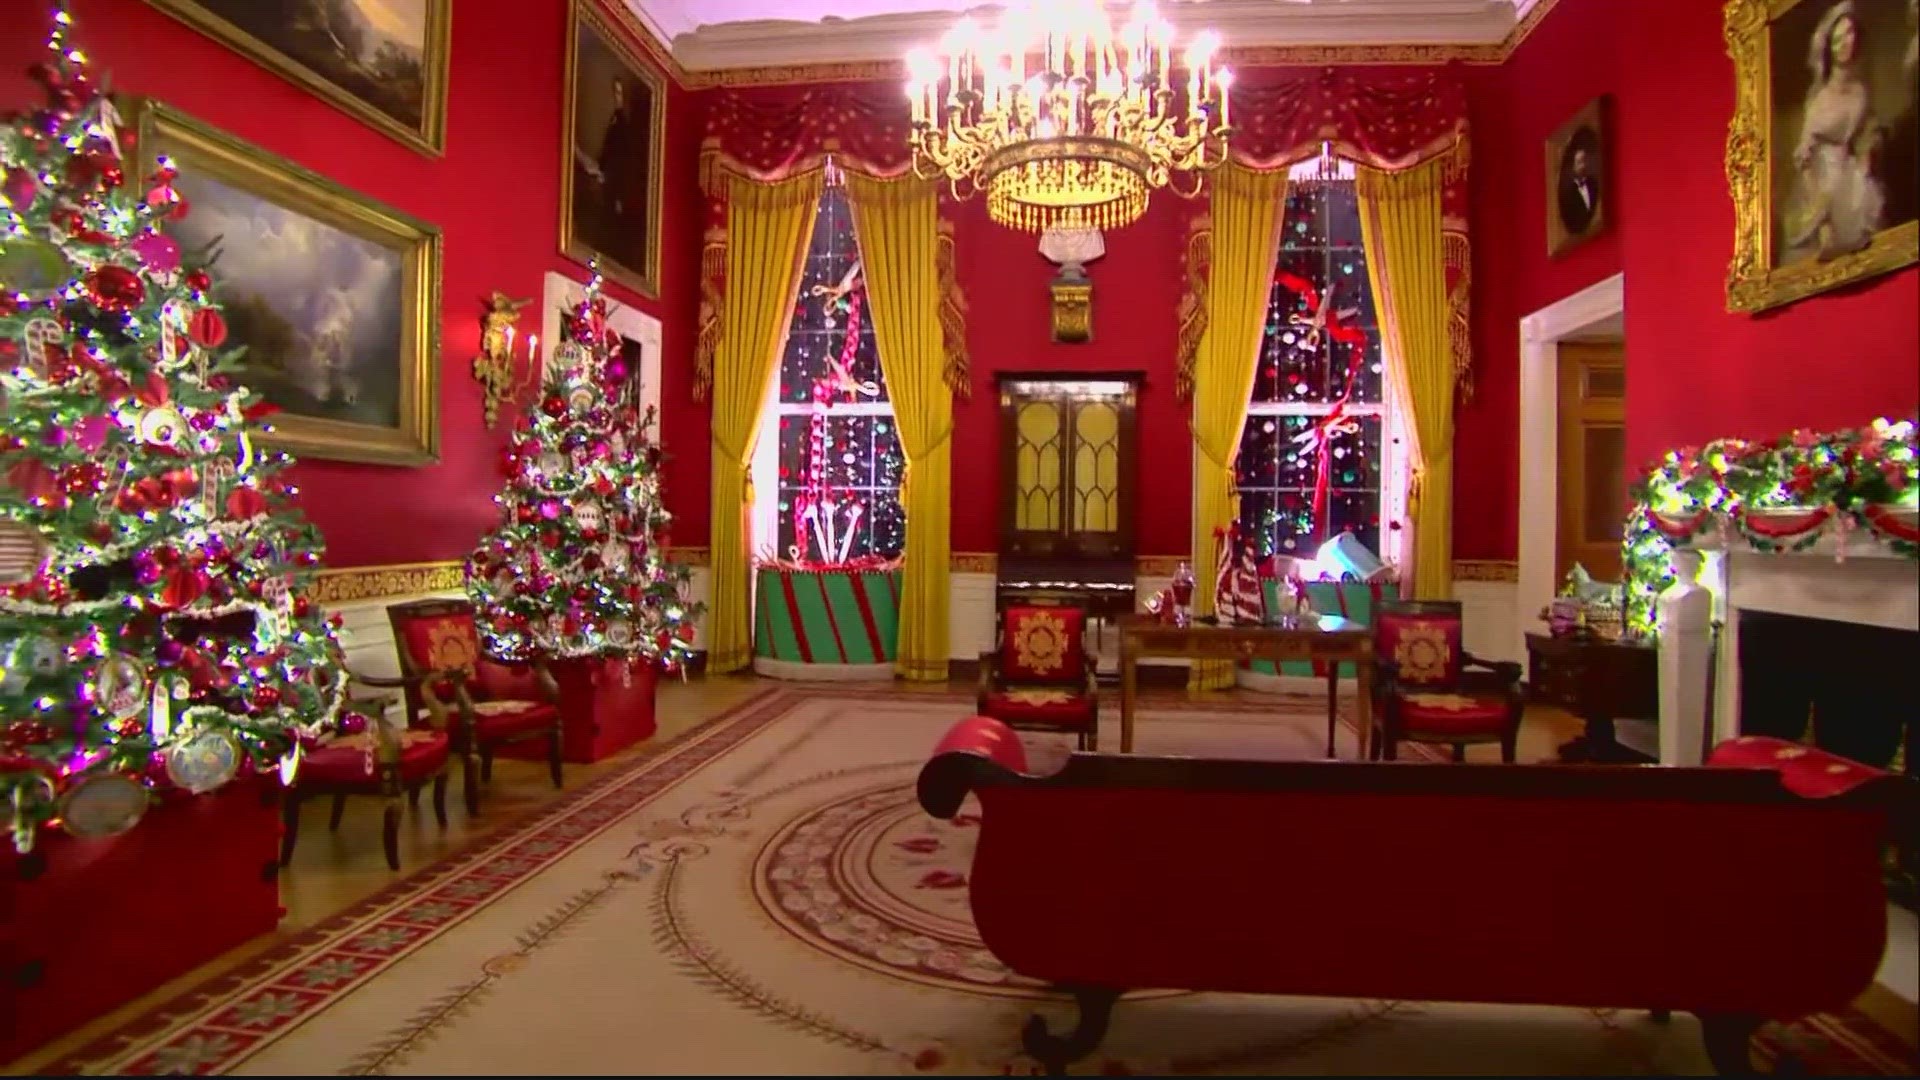 First lady Jill Biden unveils 2022 White House holiday decorations 